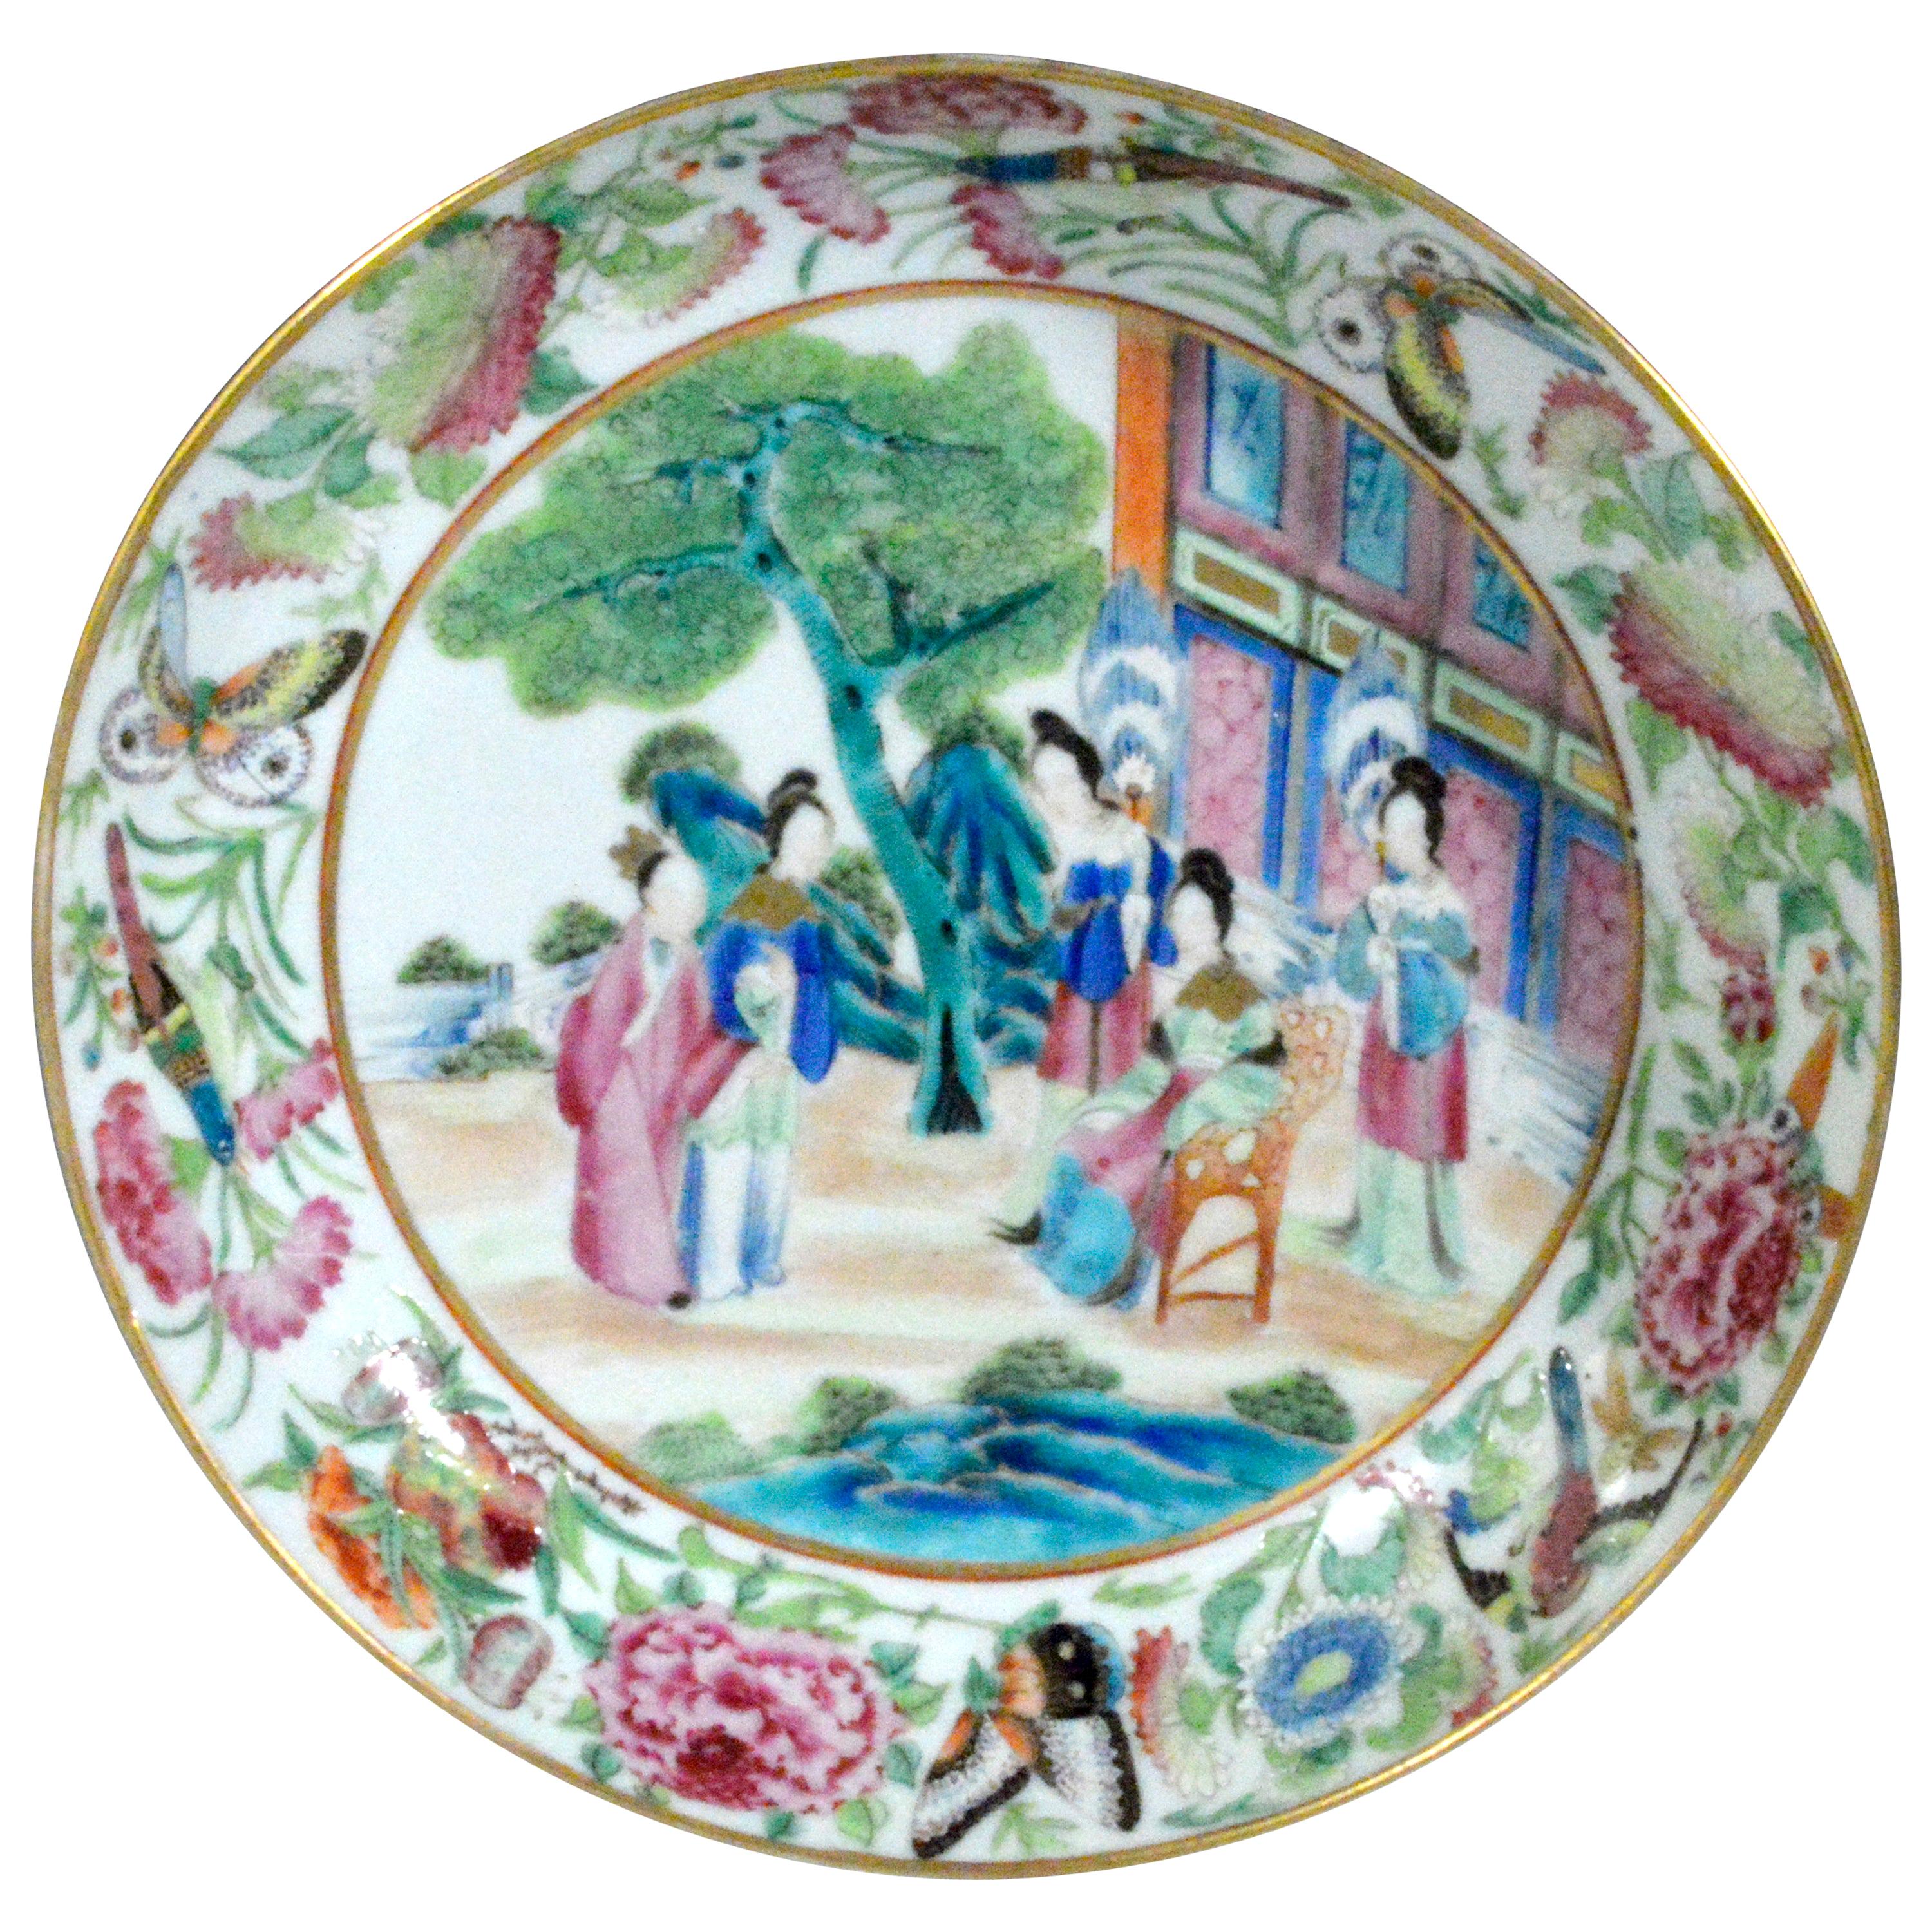 Chinese Rose Porcelain Mandarin Saucer Dish, Early 19th Centuy